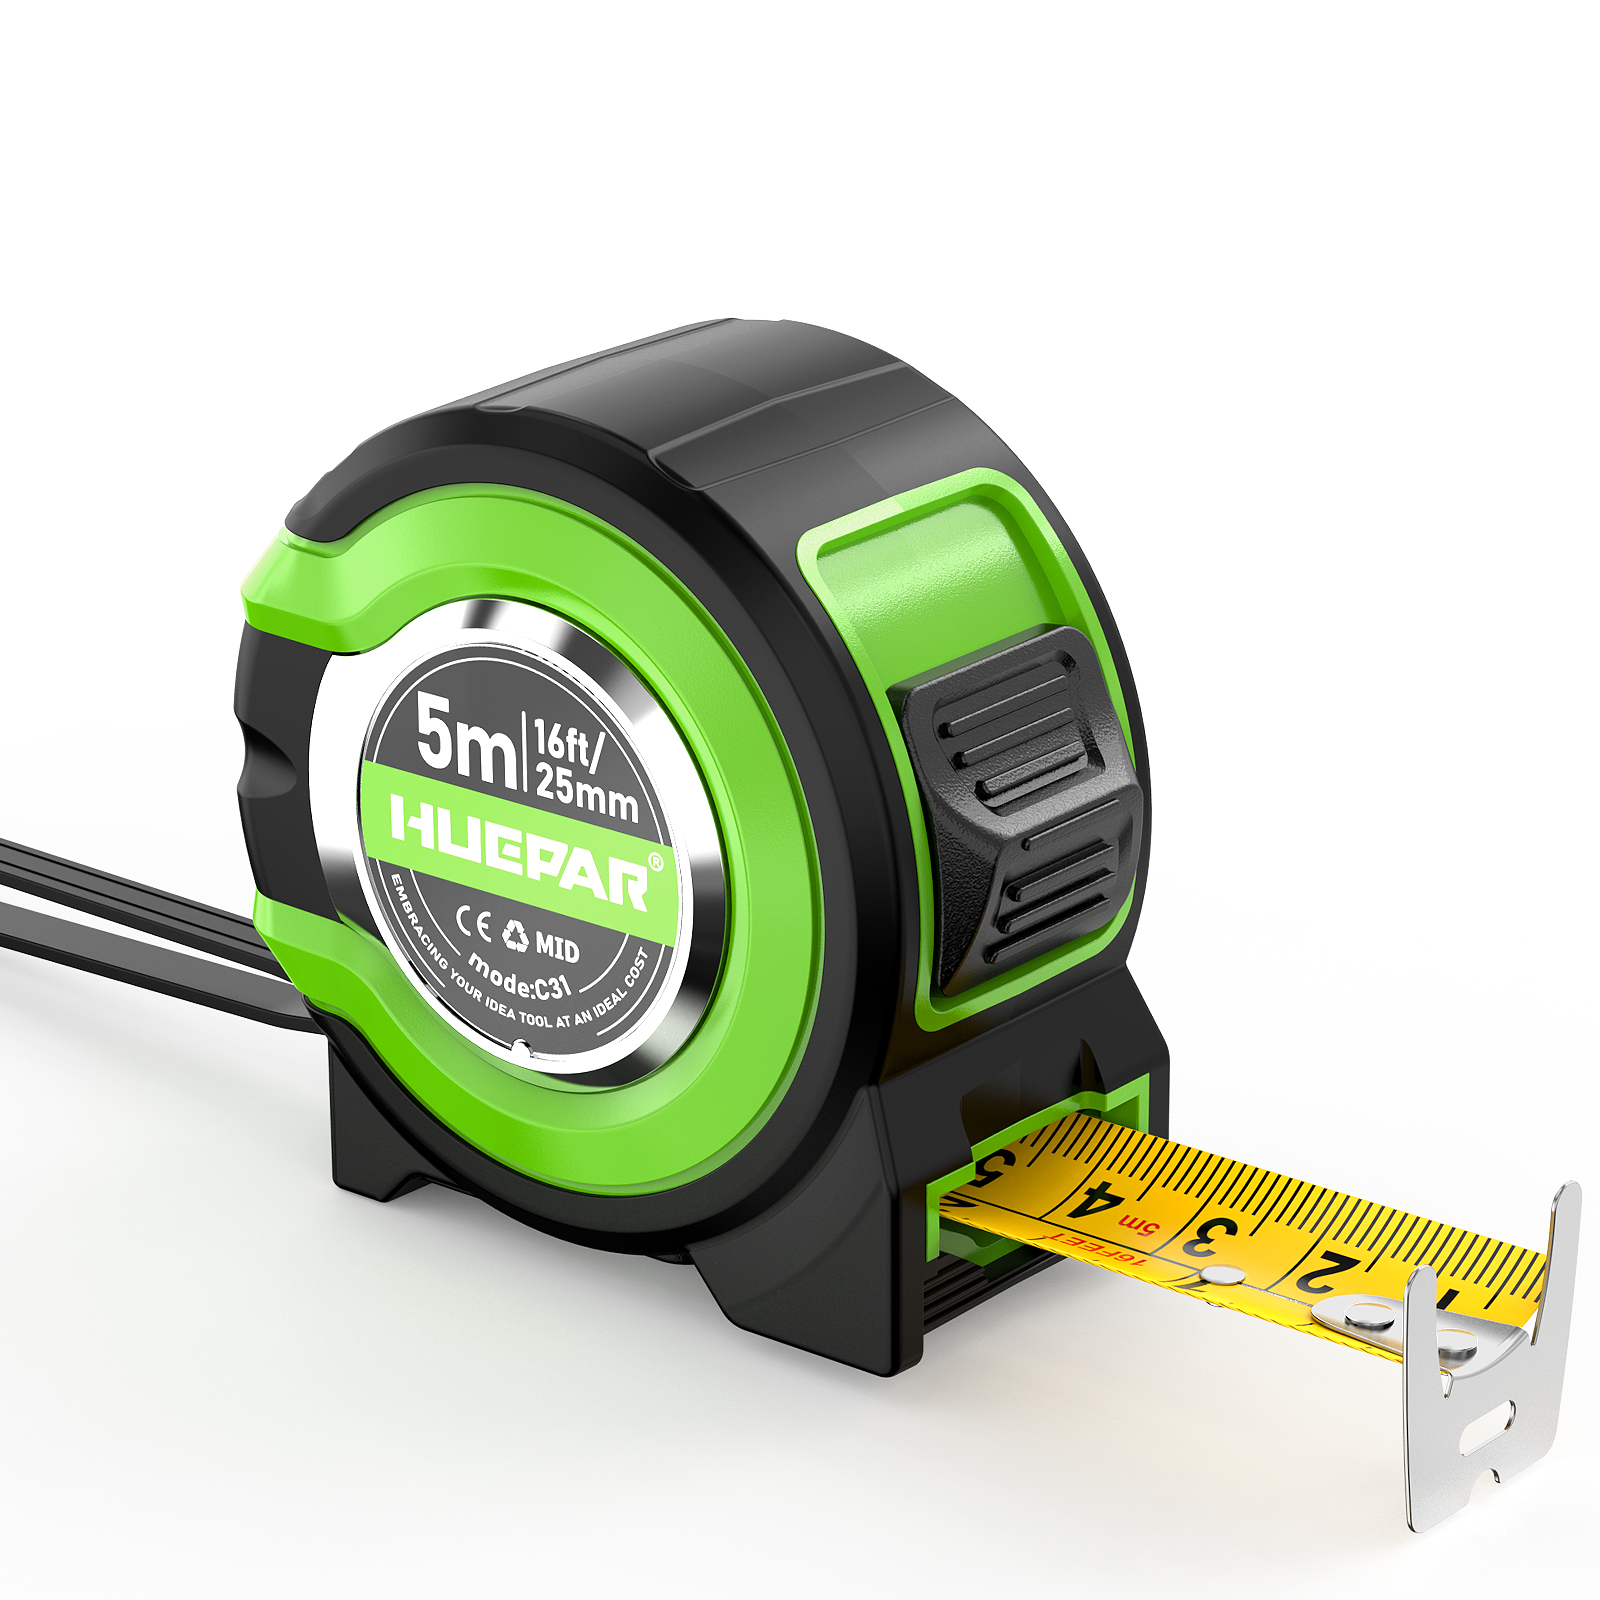 16Ft Tape Measure, 5M/16Feet Steel Retractable Tape Measure Self-Lock with Metric and Imperial Double Scale - image 1 of 10